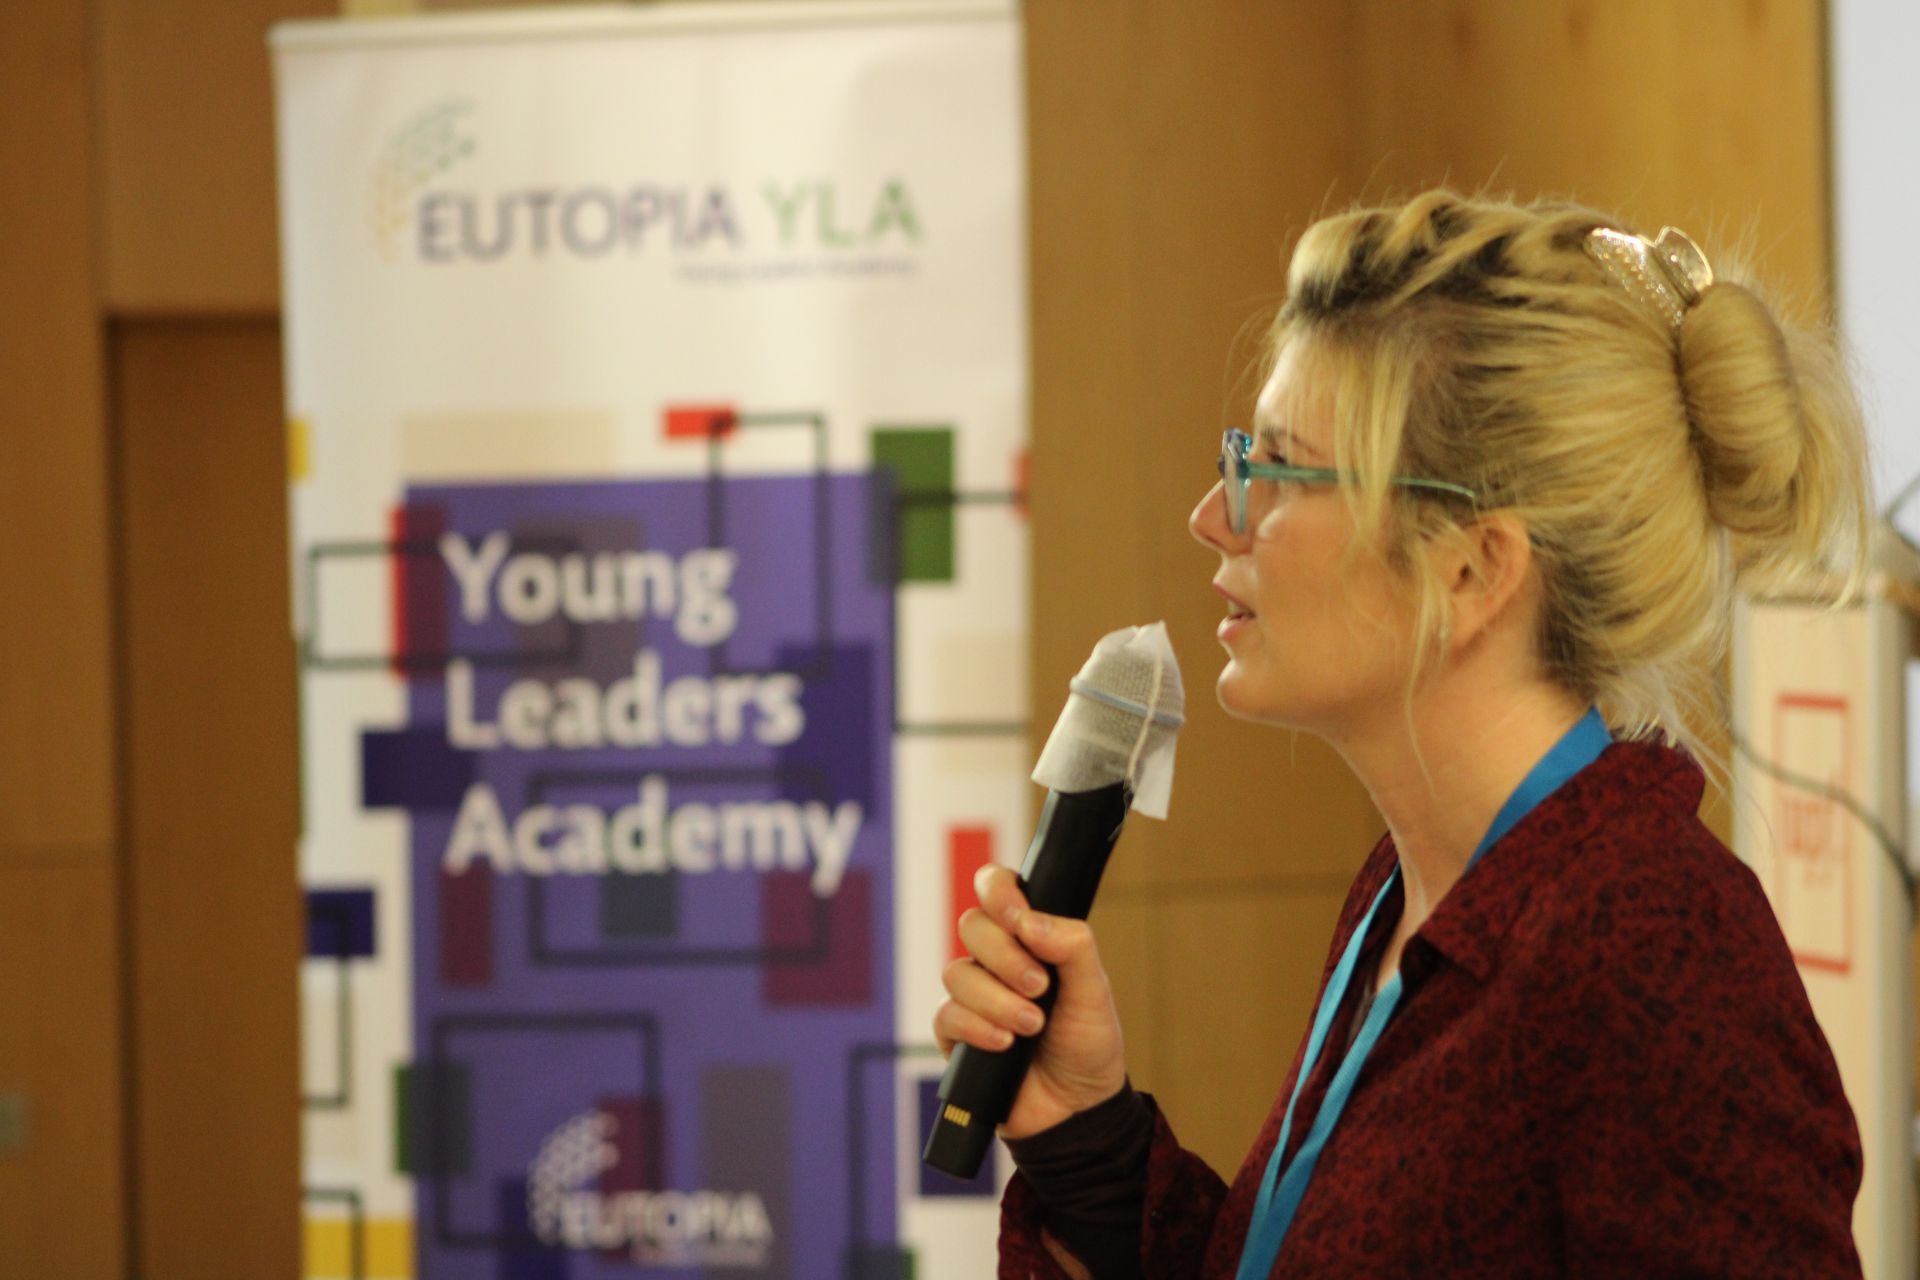 Send your application to join EUTOPIA Young Leaders Academy, until June 21st